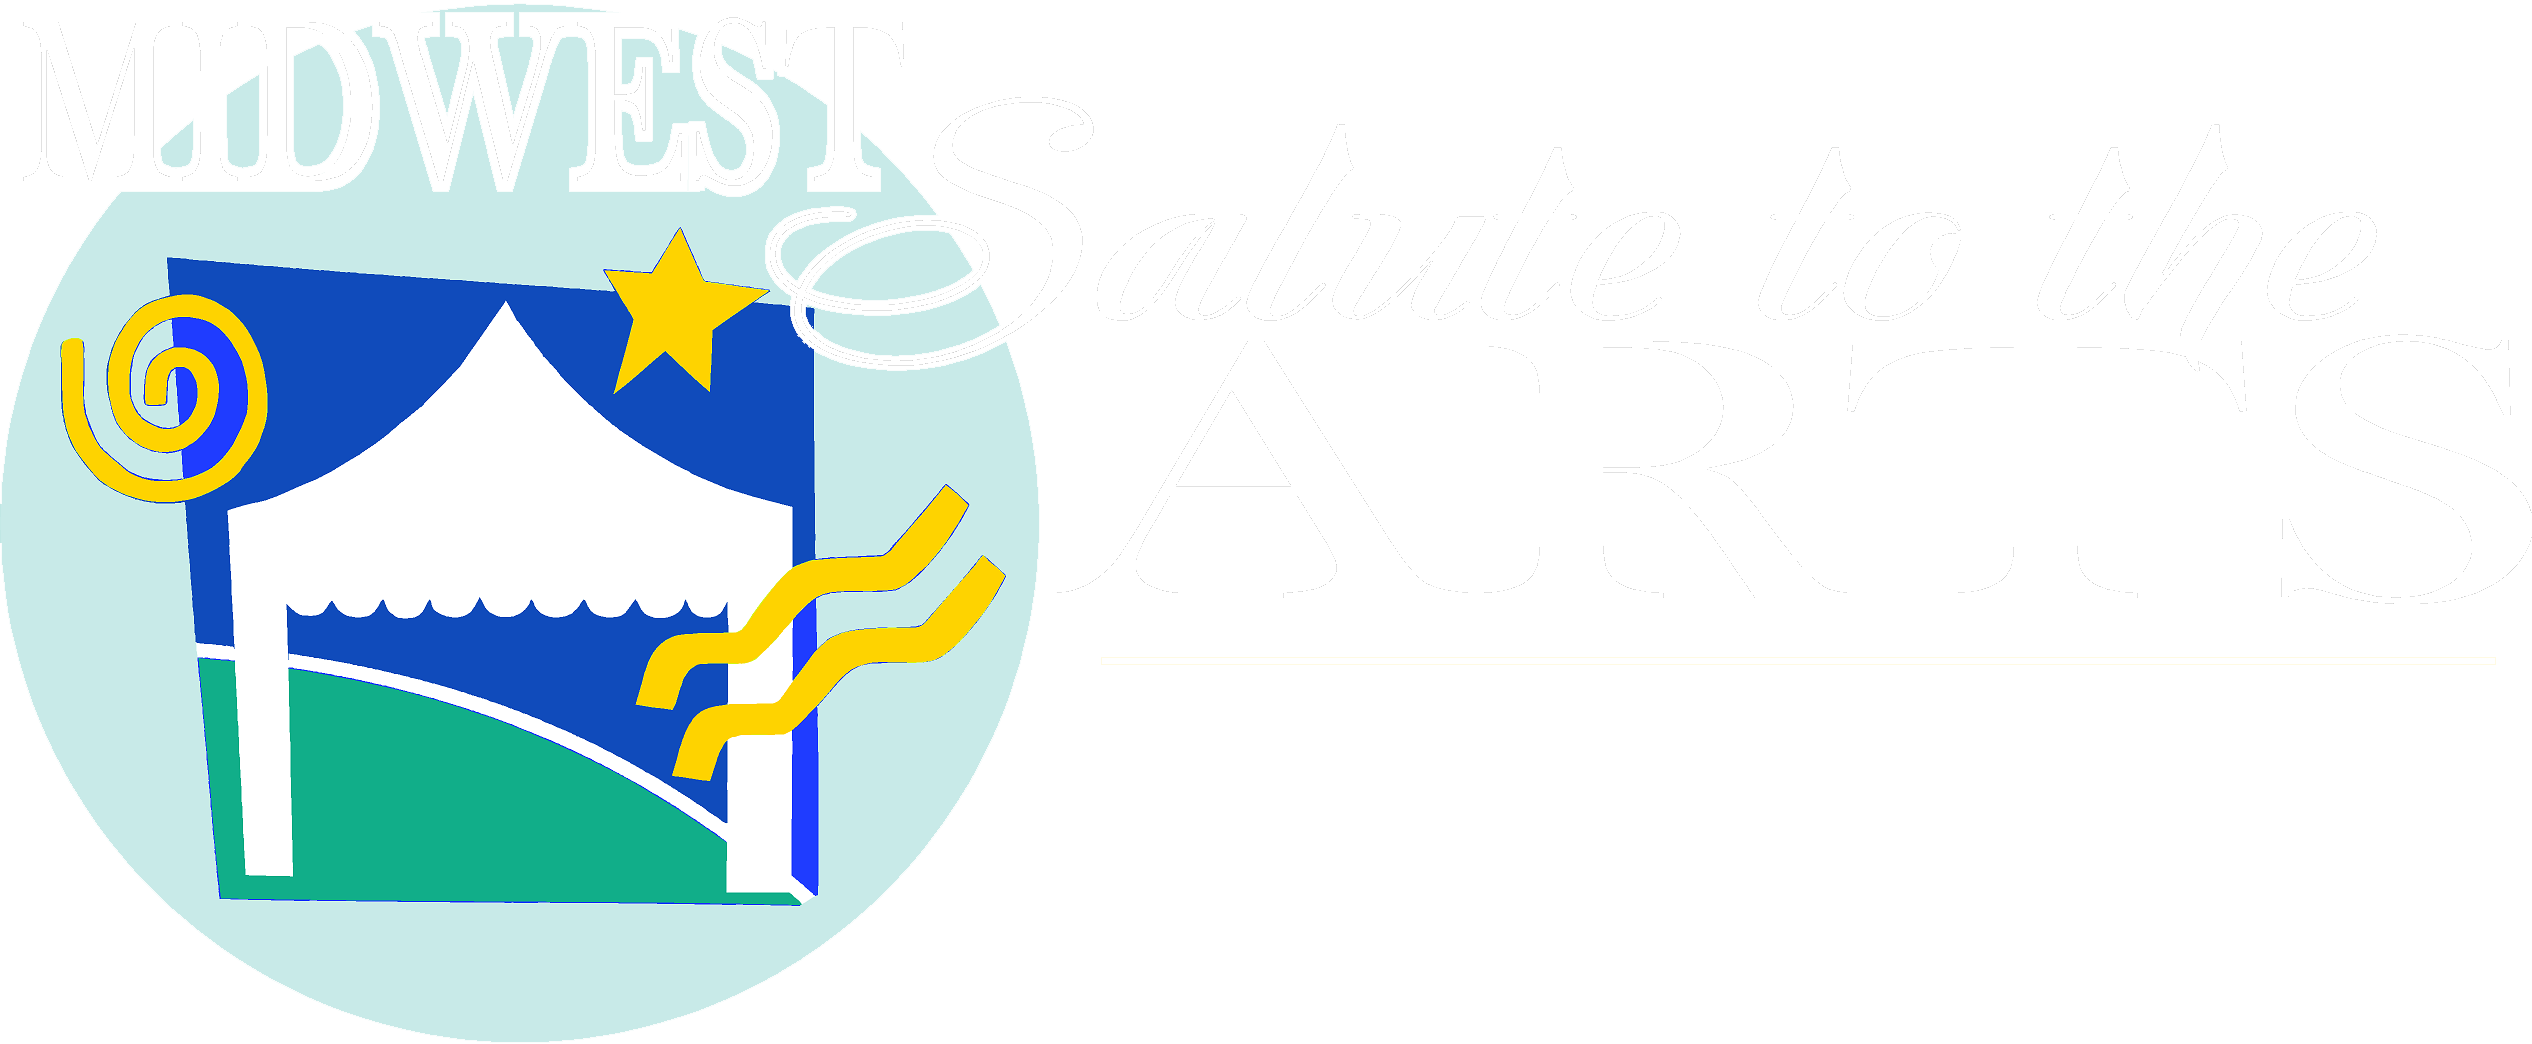 Salute Logo - Midwest Salute to the Arts Festival. August 24- 2018